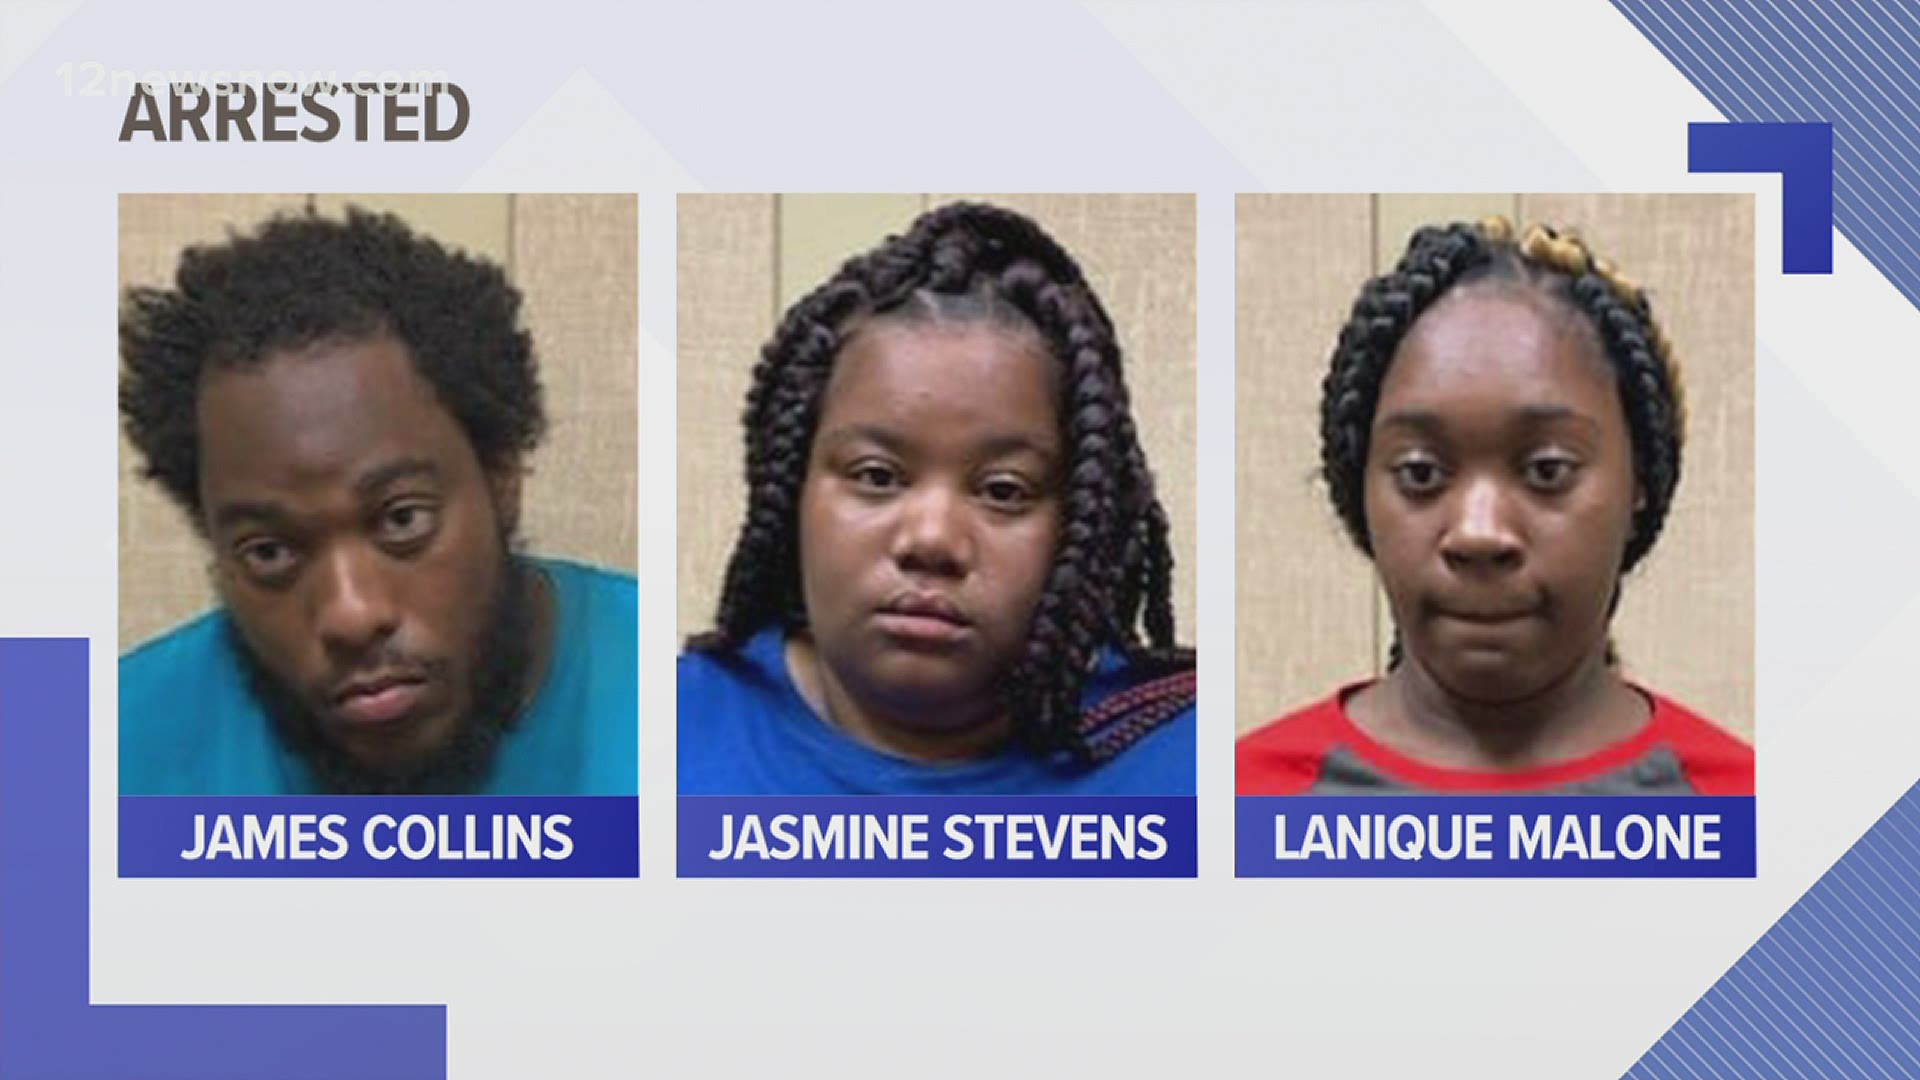 Their charges were enhanced from robbery to aggravated robbery due to the age of the victims.